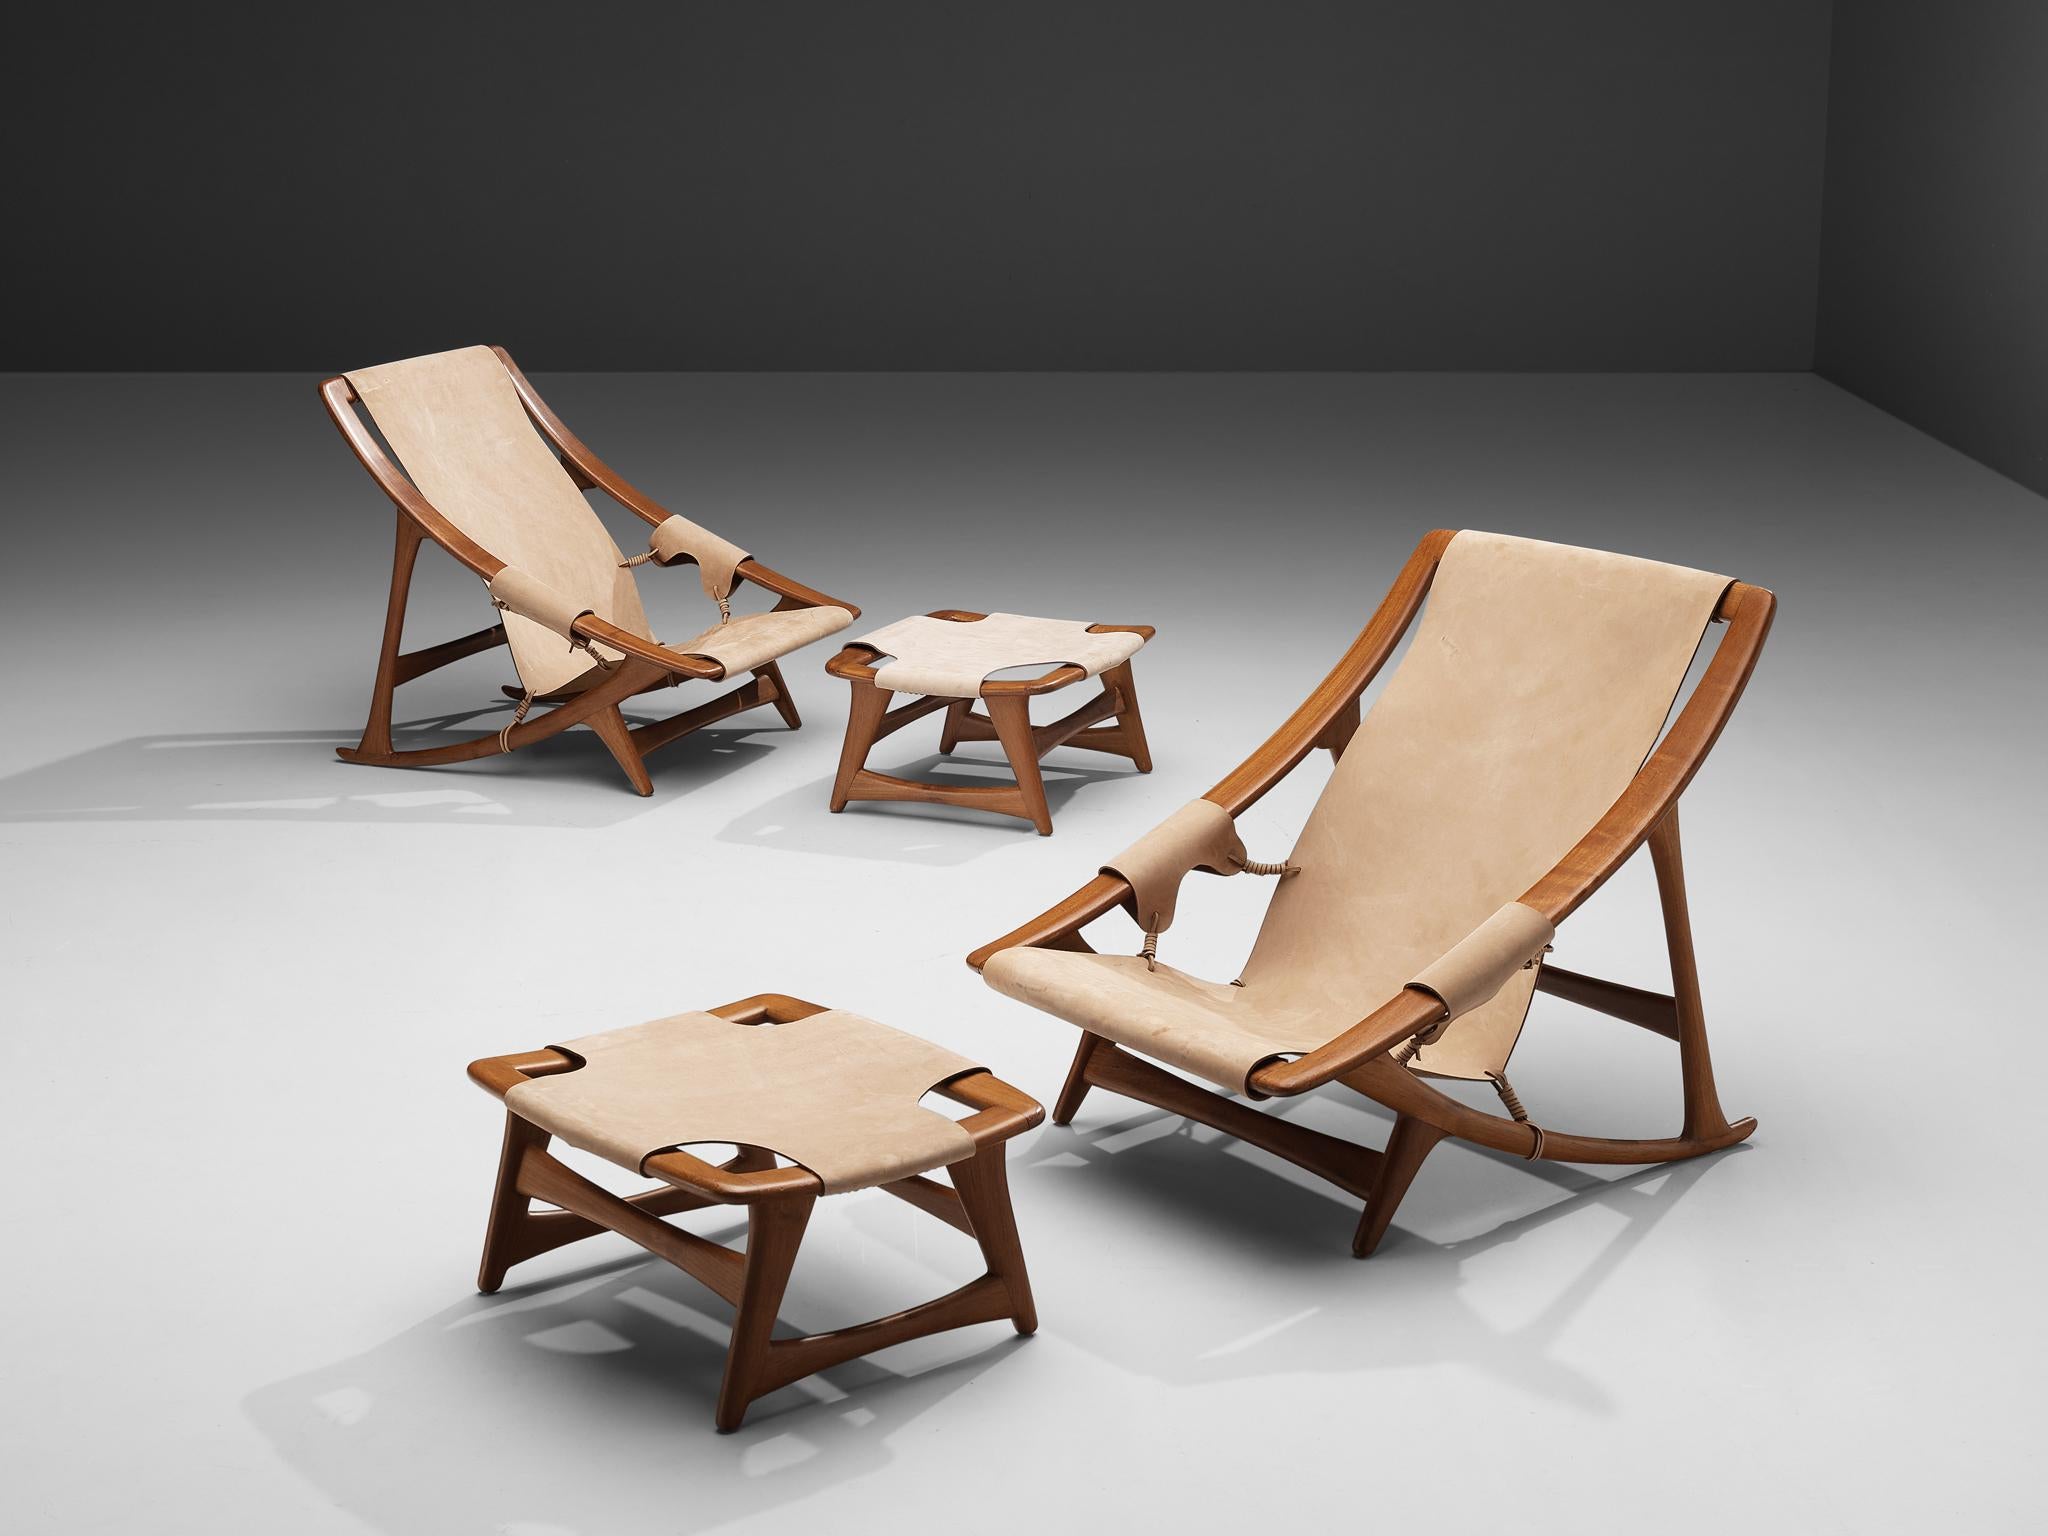 W.D. Andersag, lounge chairs with ottoman, teak, leather, Italy, 1960s

These chairs looks very dynamic due its design and shapes. The teak frame shows beautiful lines, that emphasize the chairs form. The frame and construction reminds of the